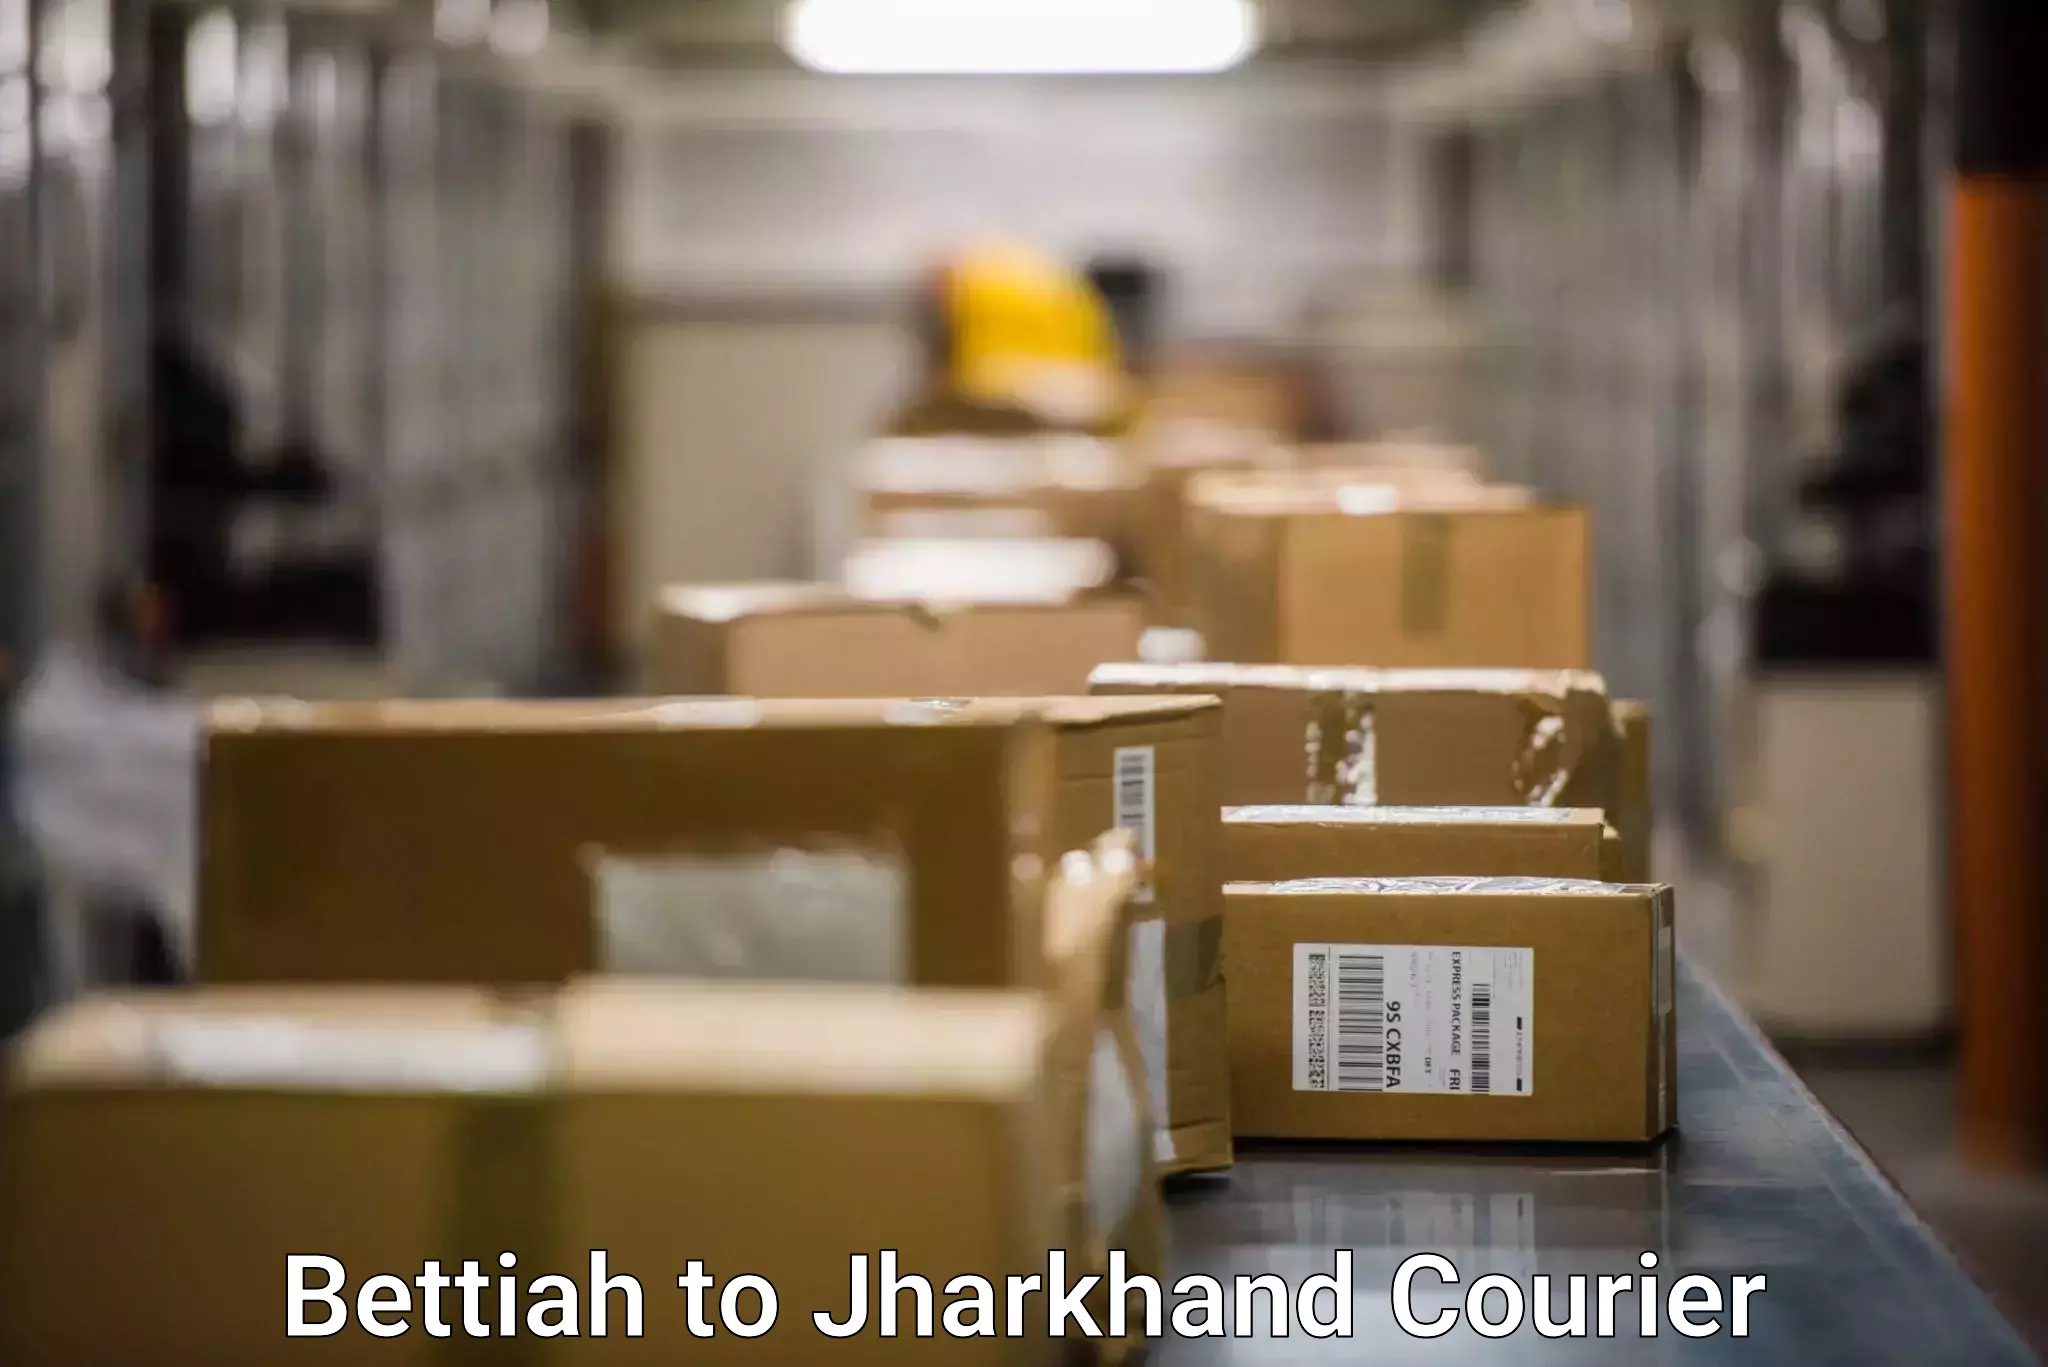 Professional courier handling Bettiah to Jamshedpur